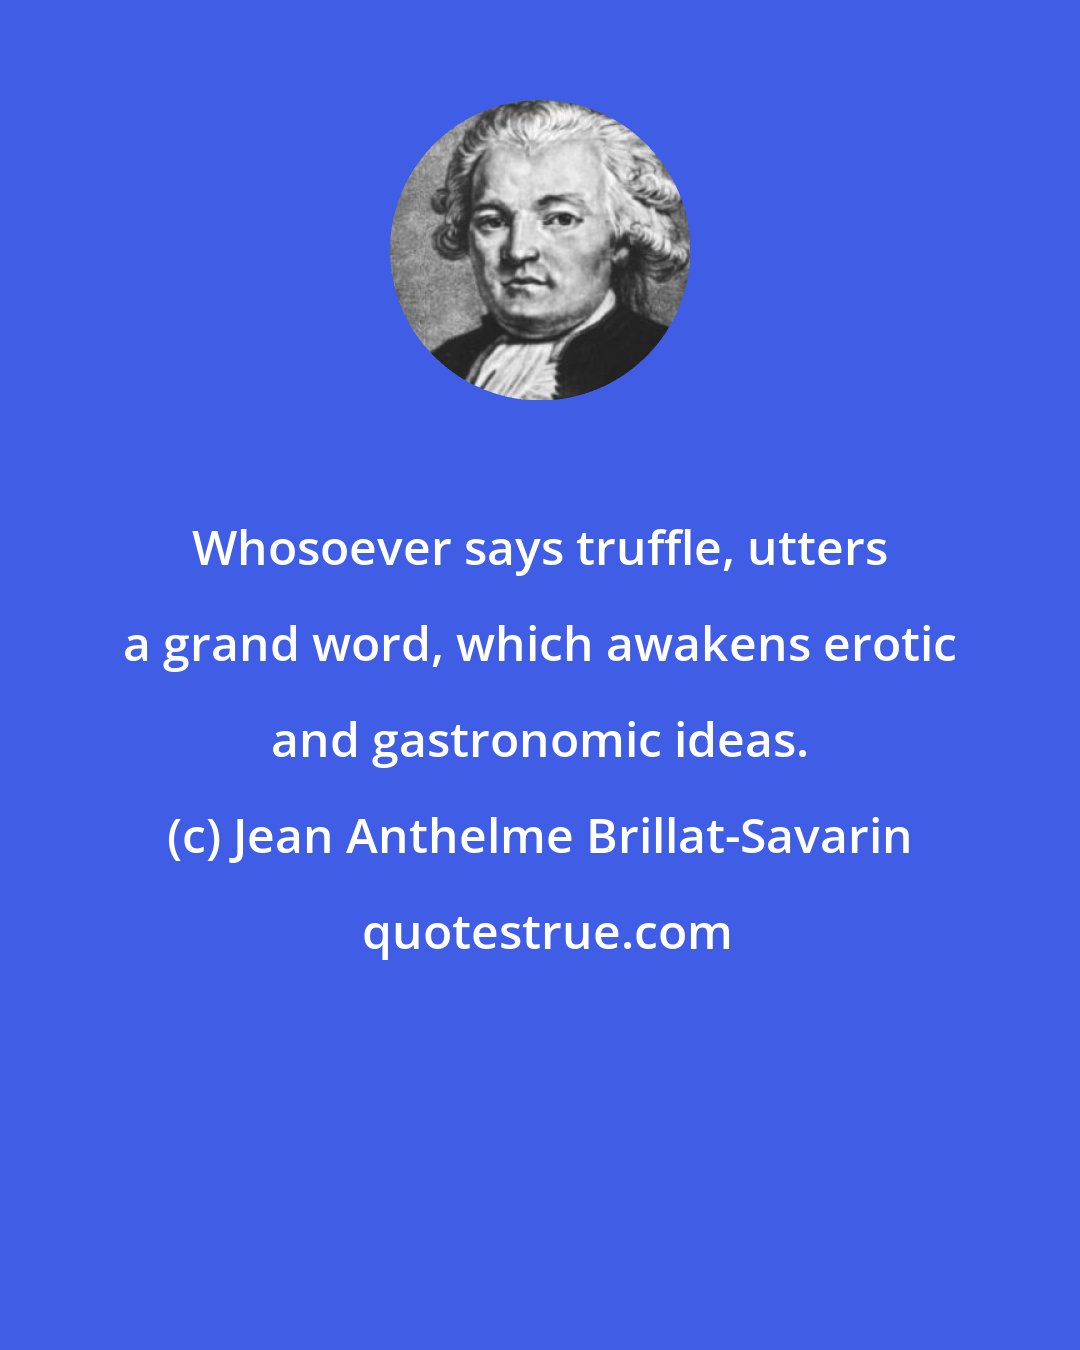 Jean Anthelme Brillat-Savarin: Whosoever says truffle, utters a grand word, which awakens erotic and gastronomic ideas.